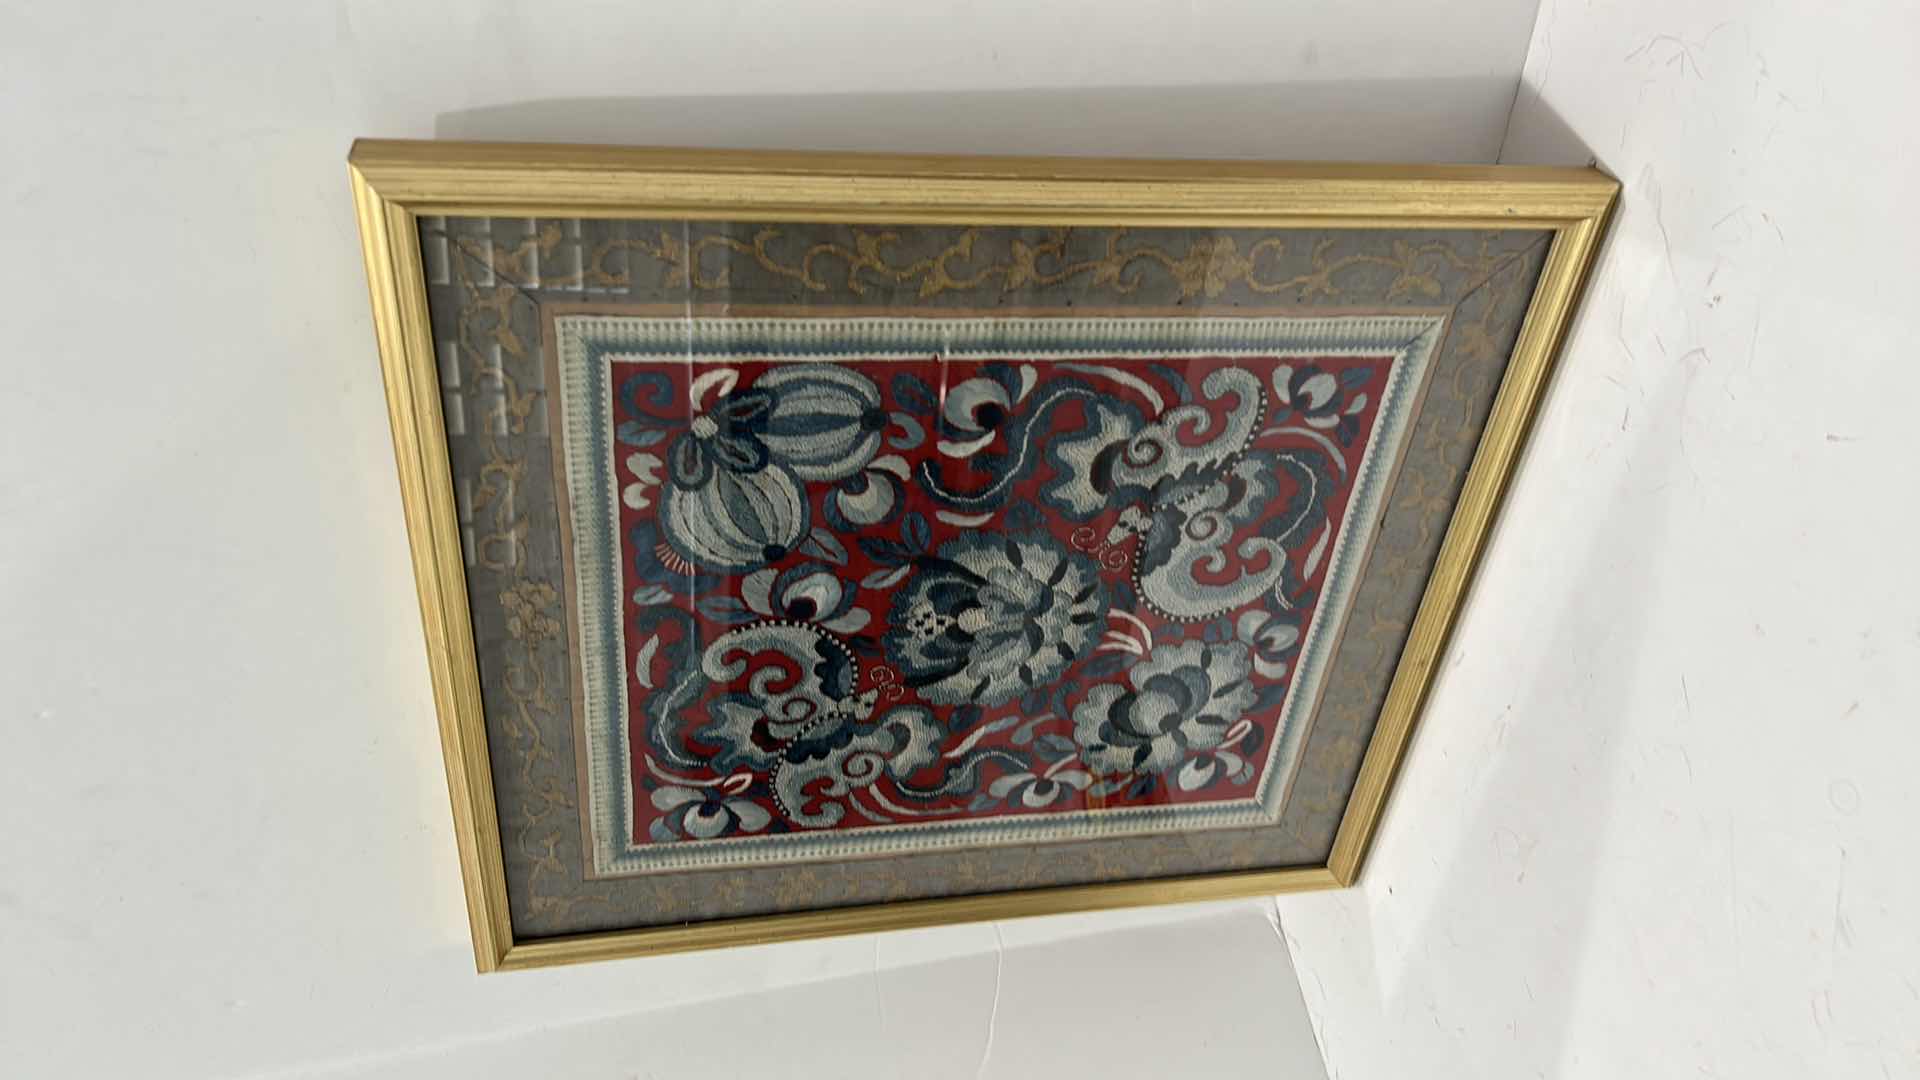 Photo 4 of 1ANTIQUE CHINESE TEXTILE FABRIC, SILK WITH SILK THREAD HAND EMBROIDERY ARTWORK FRAMED 14 1/2” x 17”4 1/2” x 17”